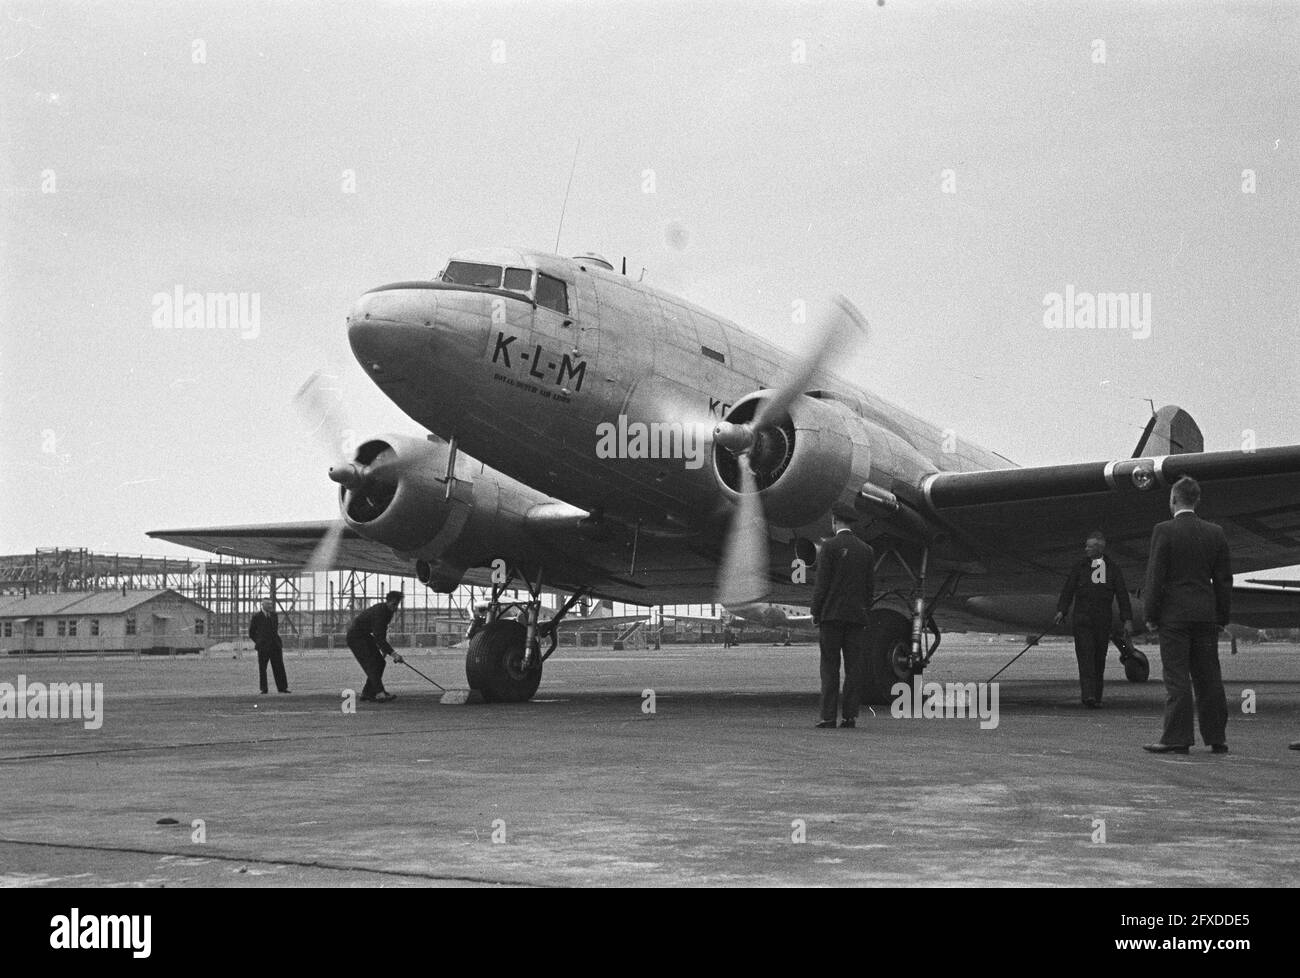 Dc3 Black and White Stock Photos & Images - Alamy